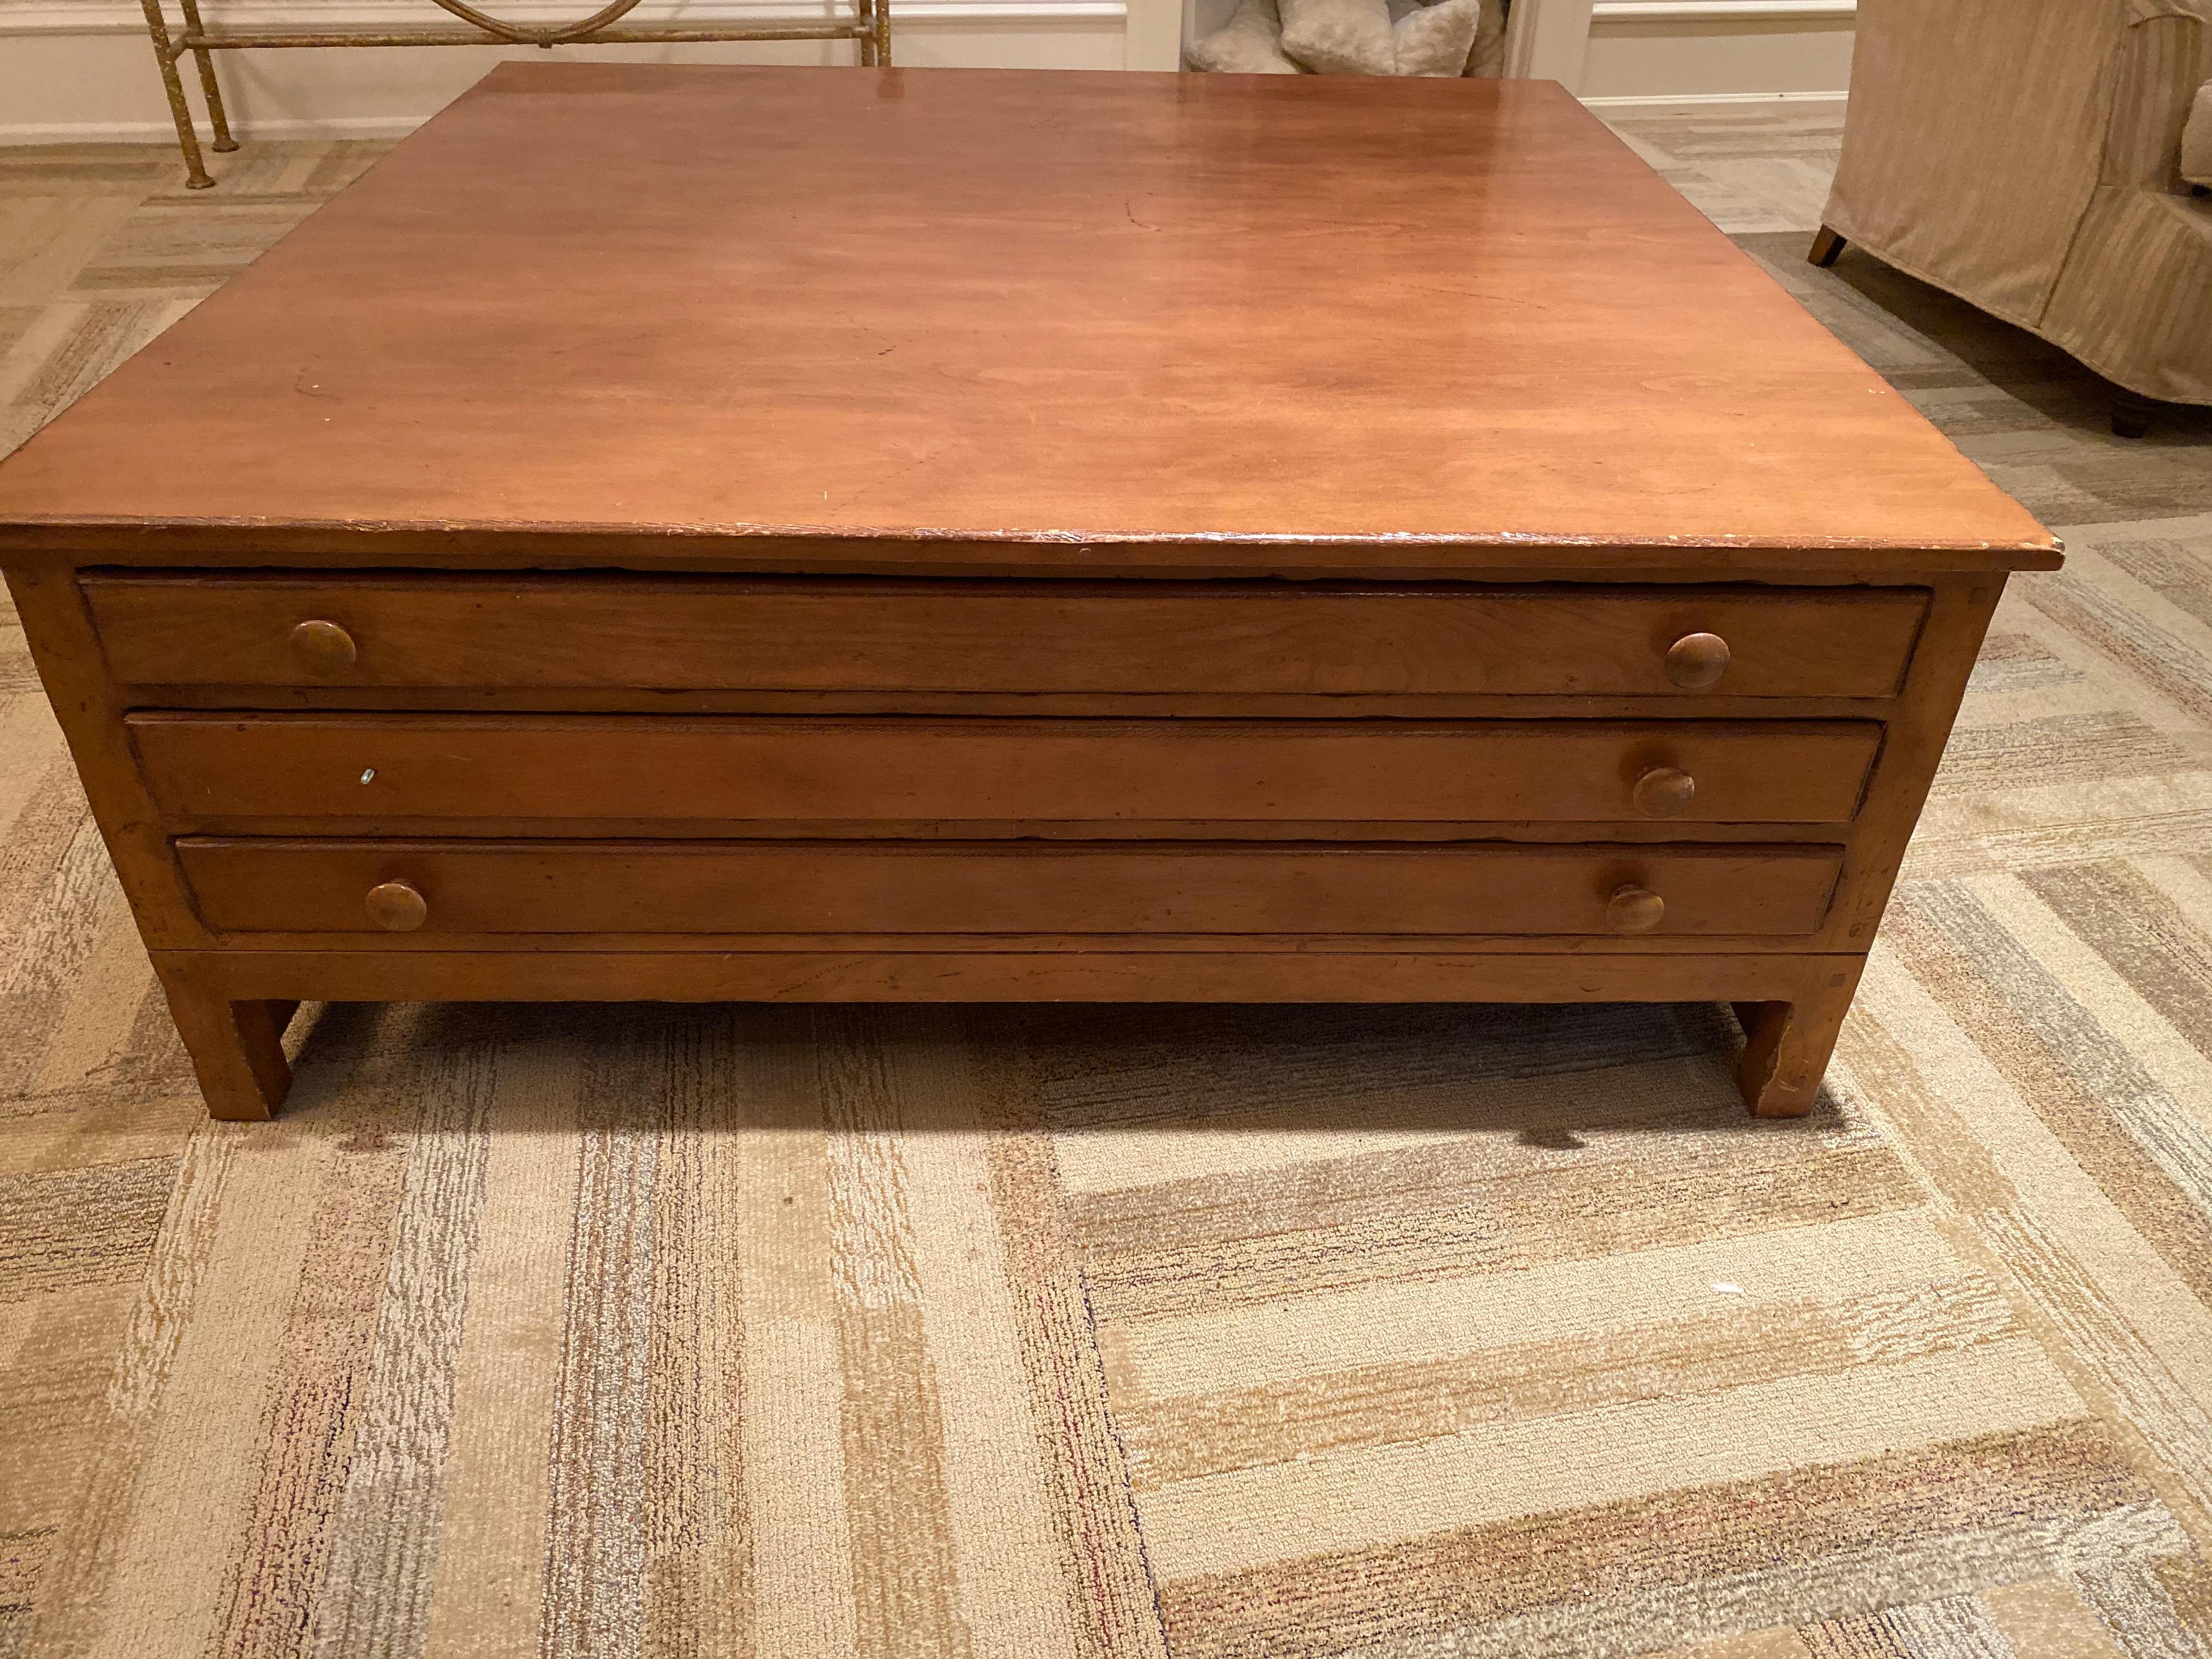 Perfectly scaled for a large space, this coffee table is vintage map drawer style.
Polished maple, large drawers, iconic.